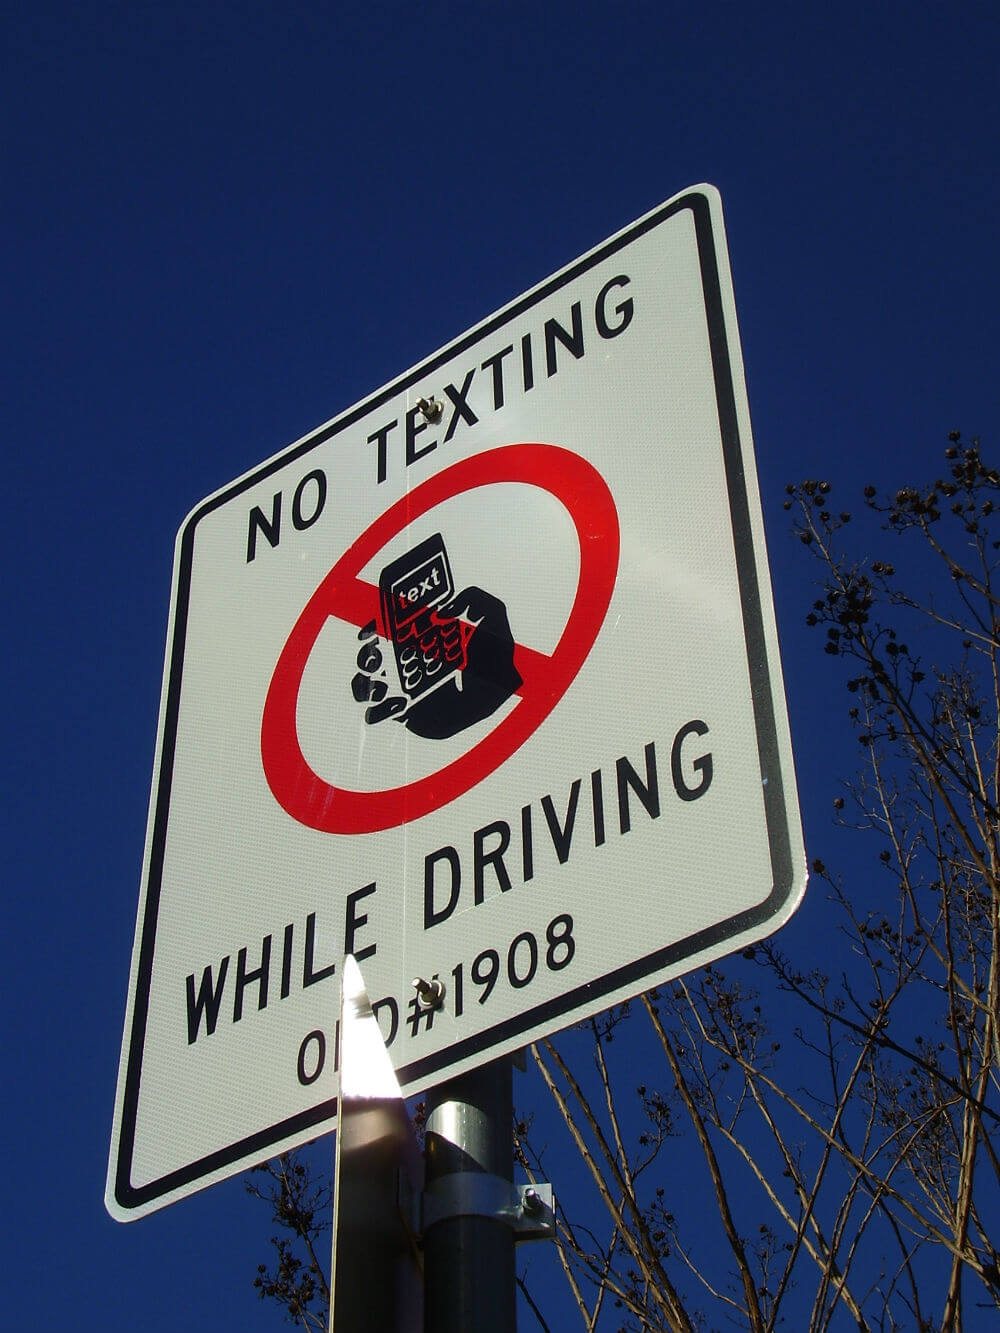 Distracted Driving Is Making Roads More Dangerous -- Who Is The Worst Offender?